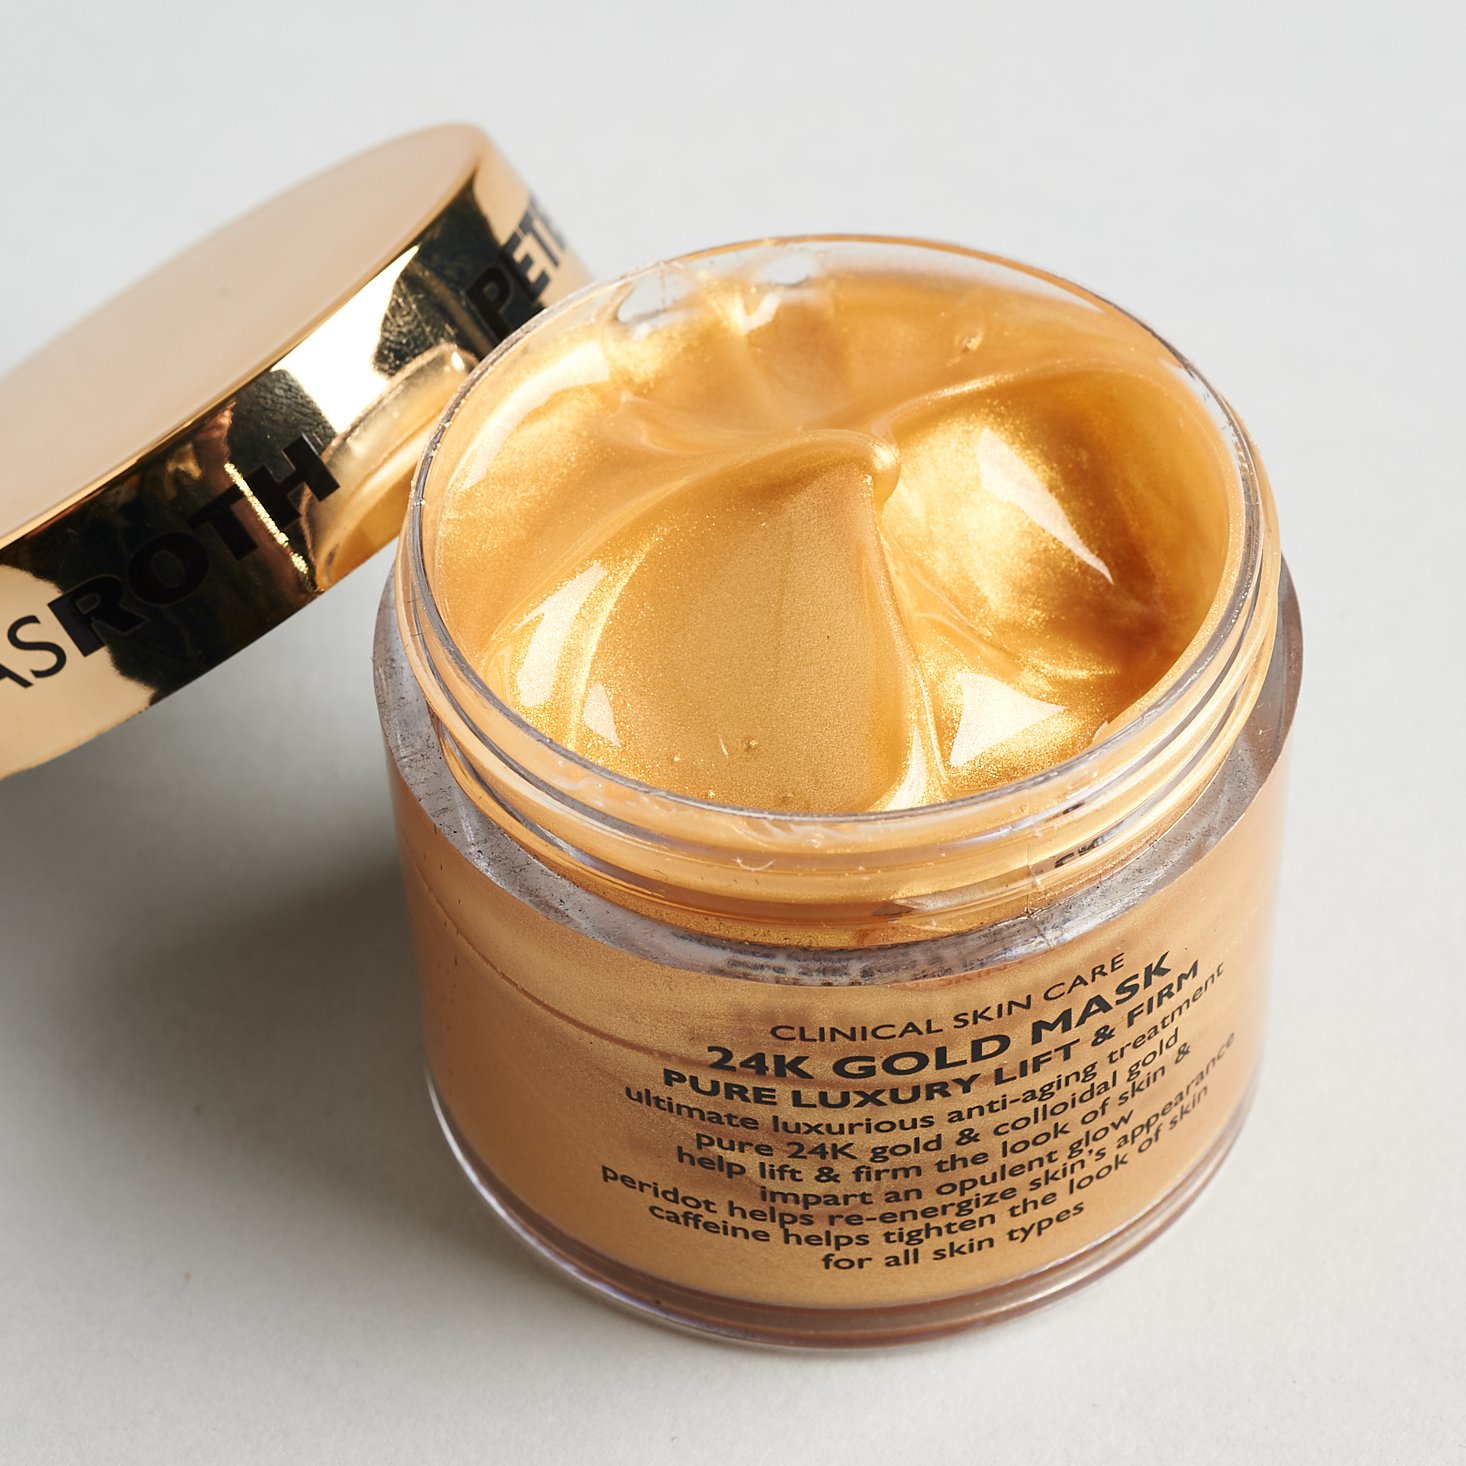 Peter Thomas Roth 24k Gold Mask Pure Luxury Lift & Firm Mask with lid off